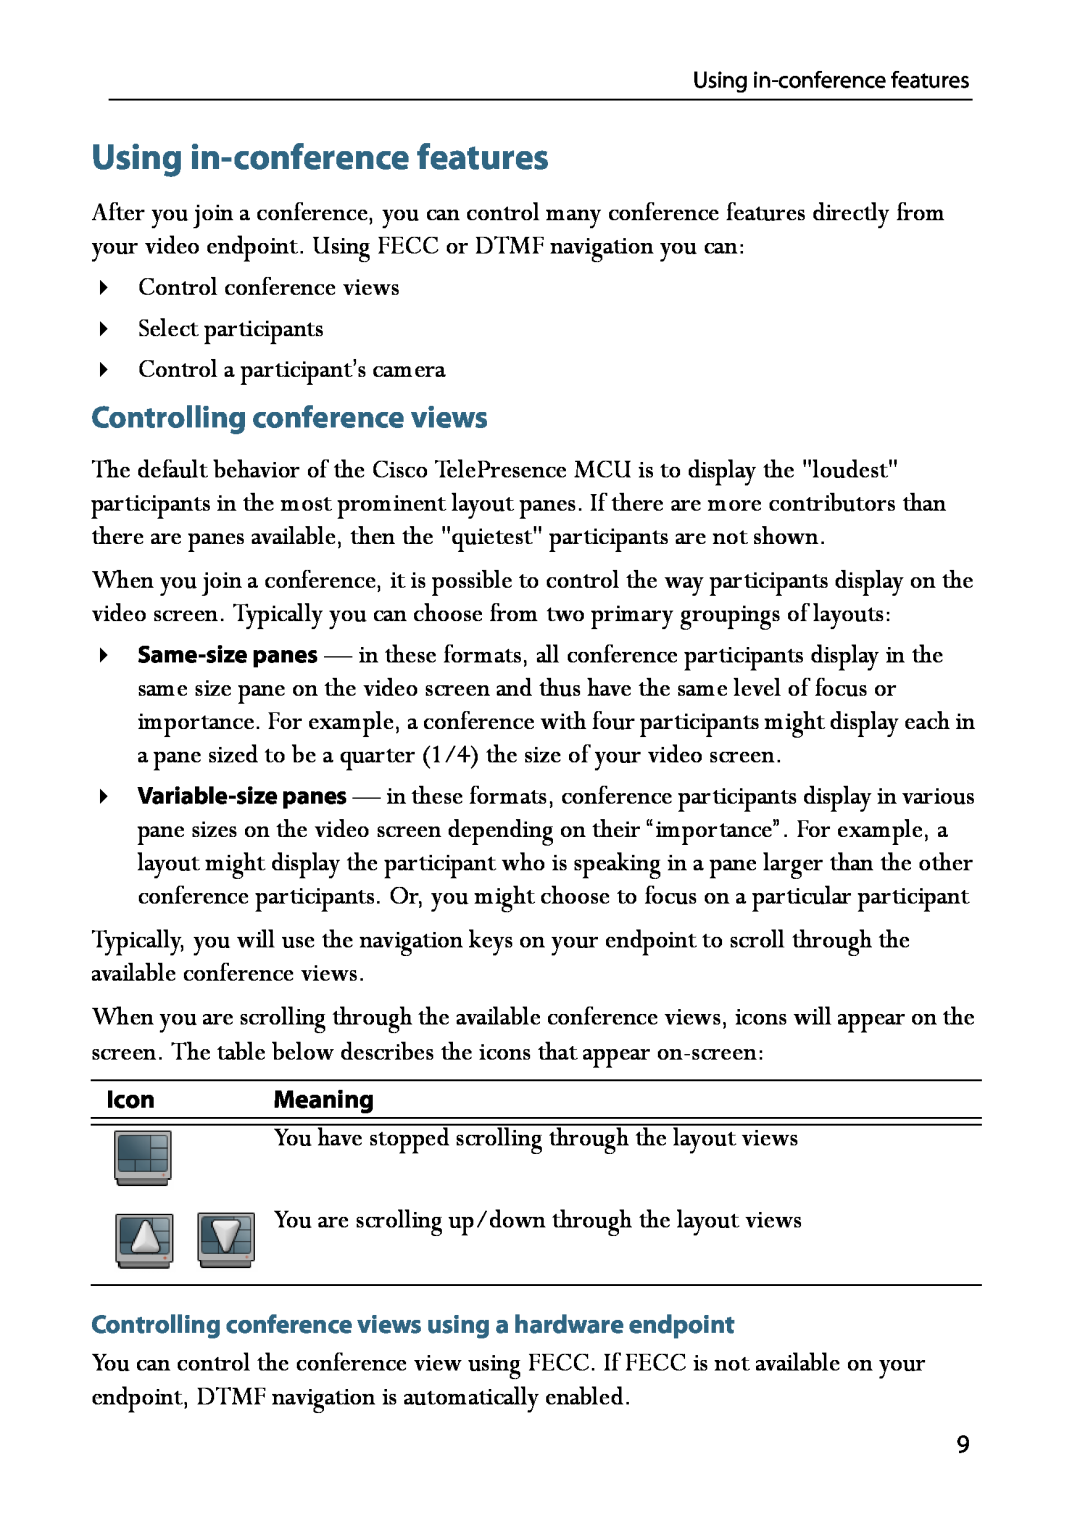 Cisco Systems 14523.02 manual Using in-conference features, Controlling conference views 